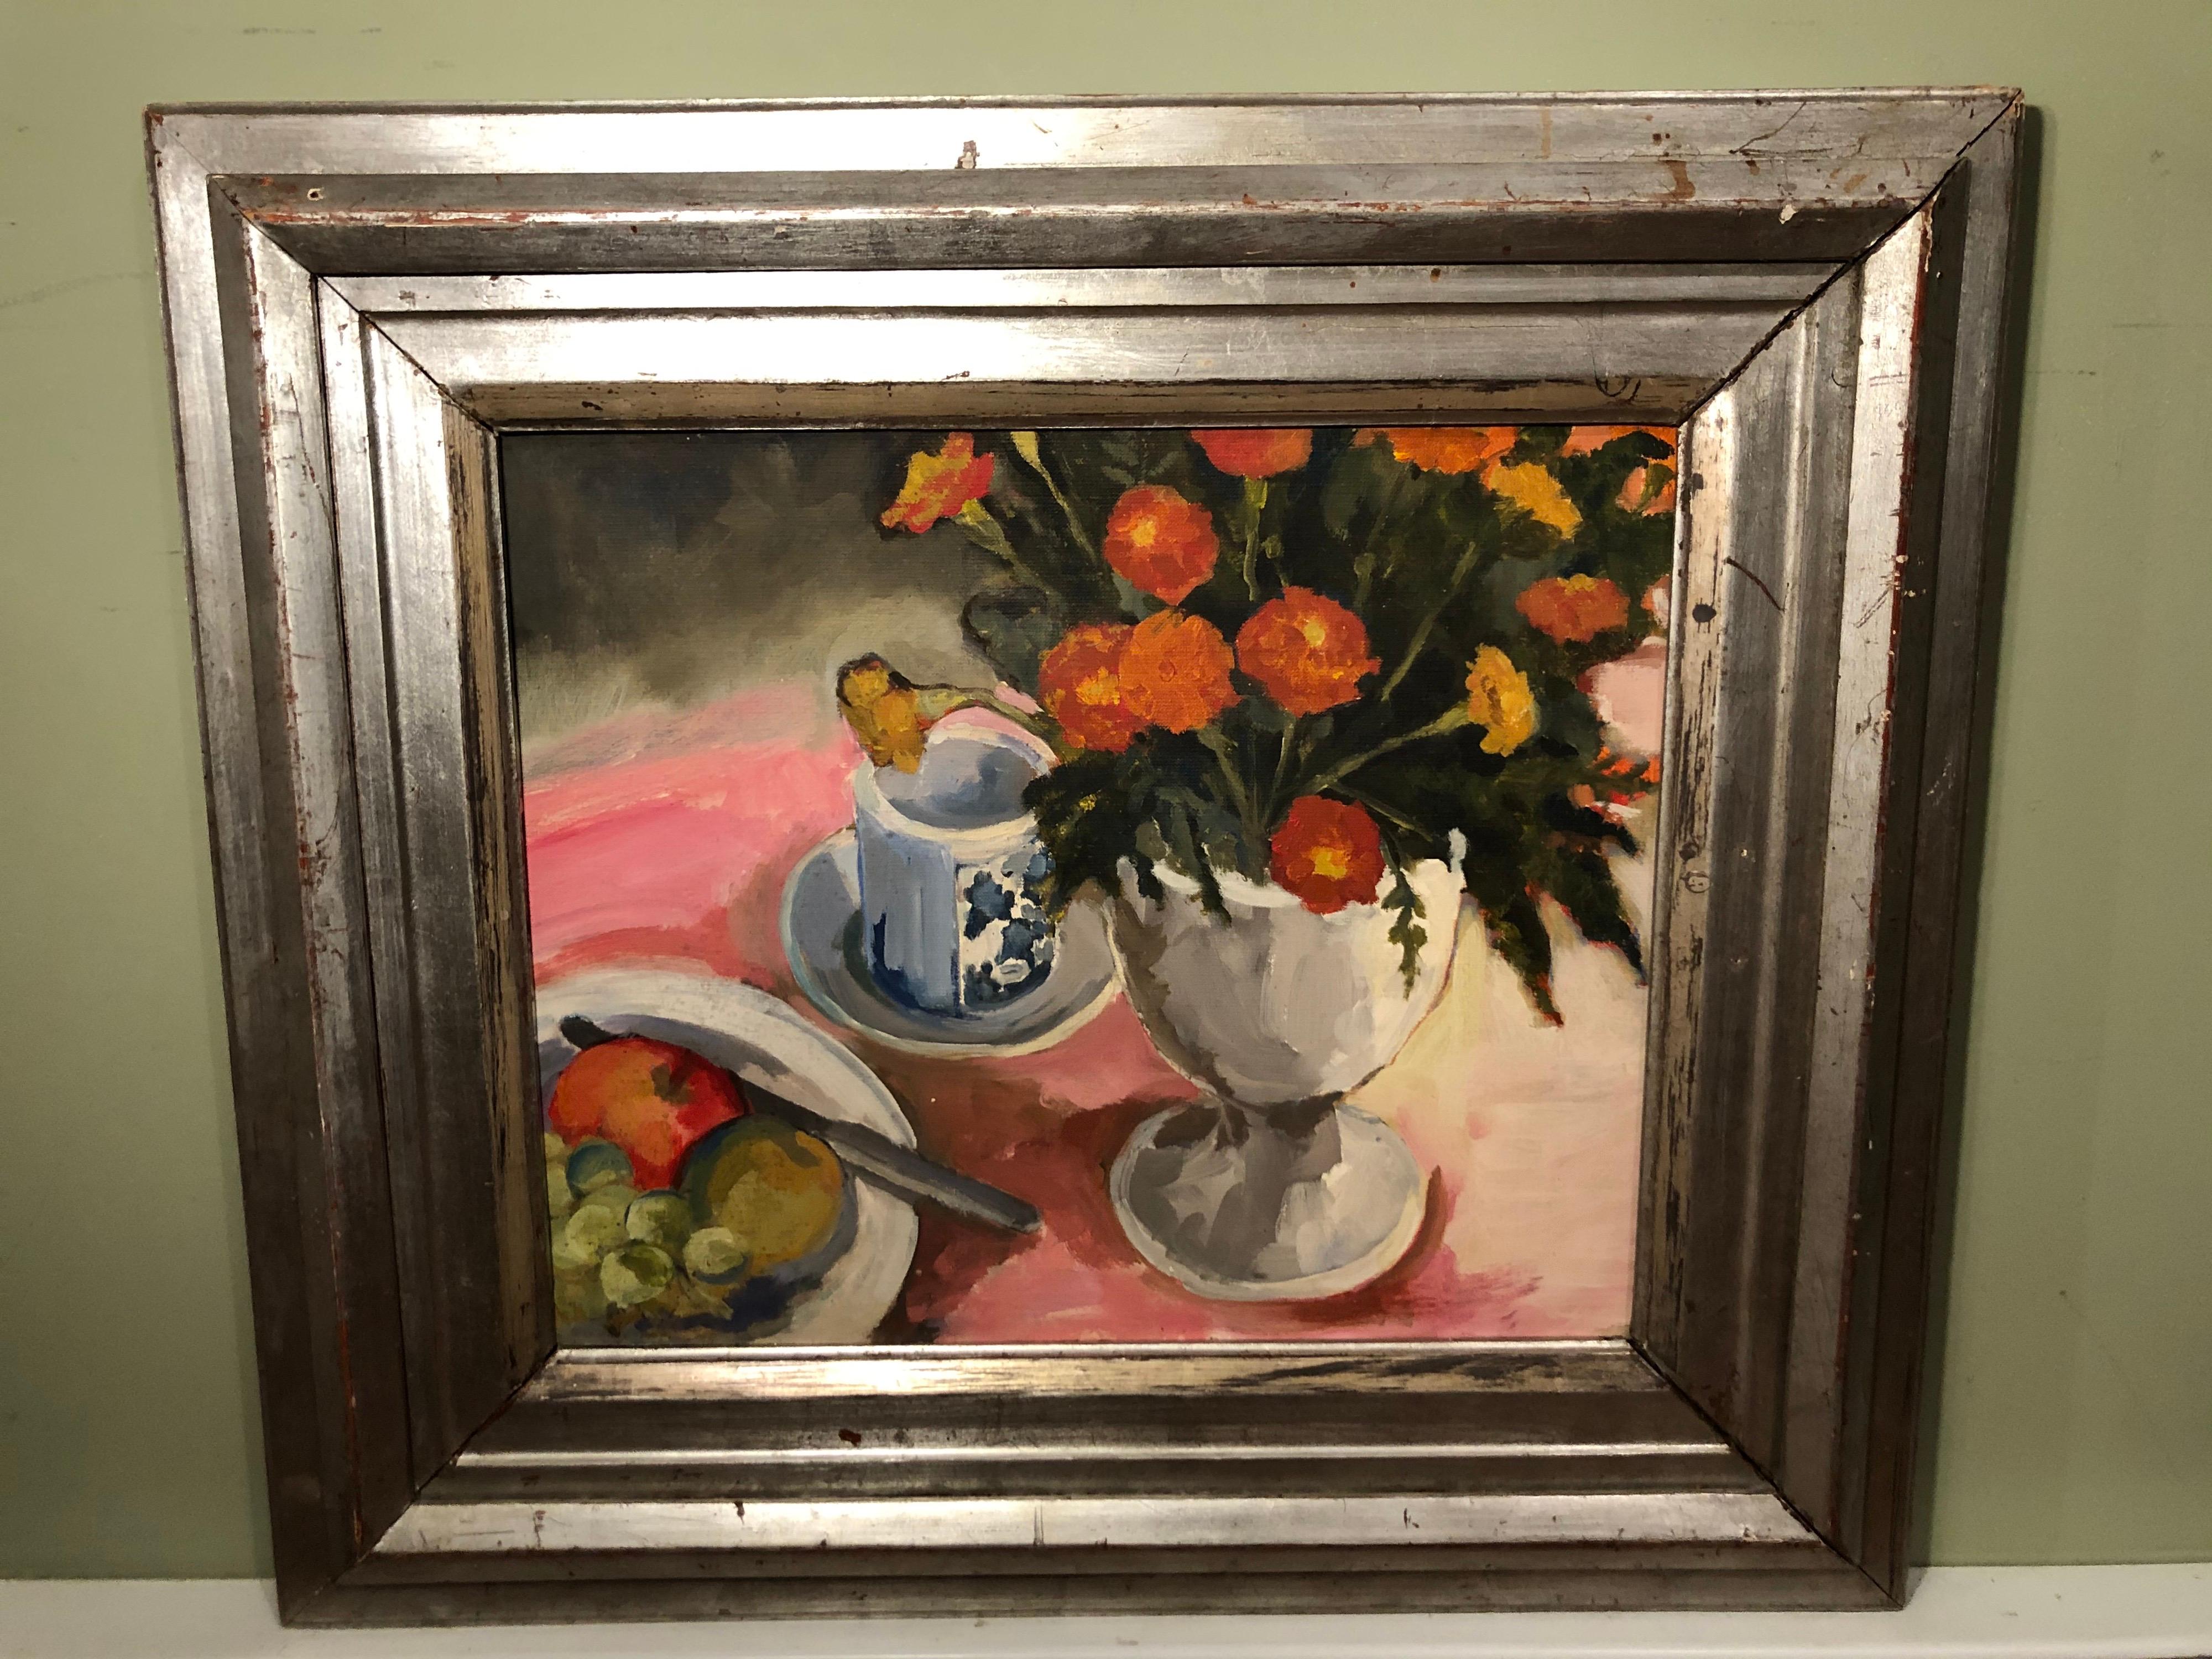 1977 still life of Marigolds by Arlene Skutch. Large composition by native Westport CT artist. Nice largecompostion on canvas of a floral still life . Housed in a thick solid wooden silver gilt frame.
Prior to Arlene Skutchs career as a visual